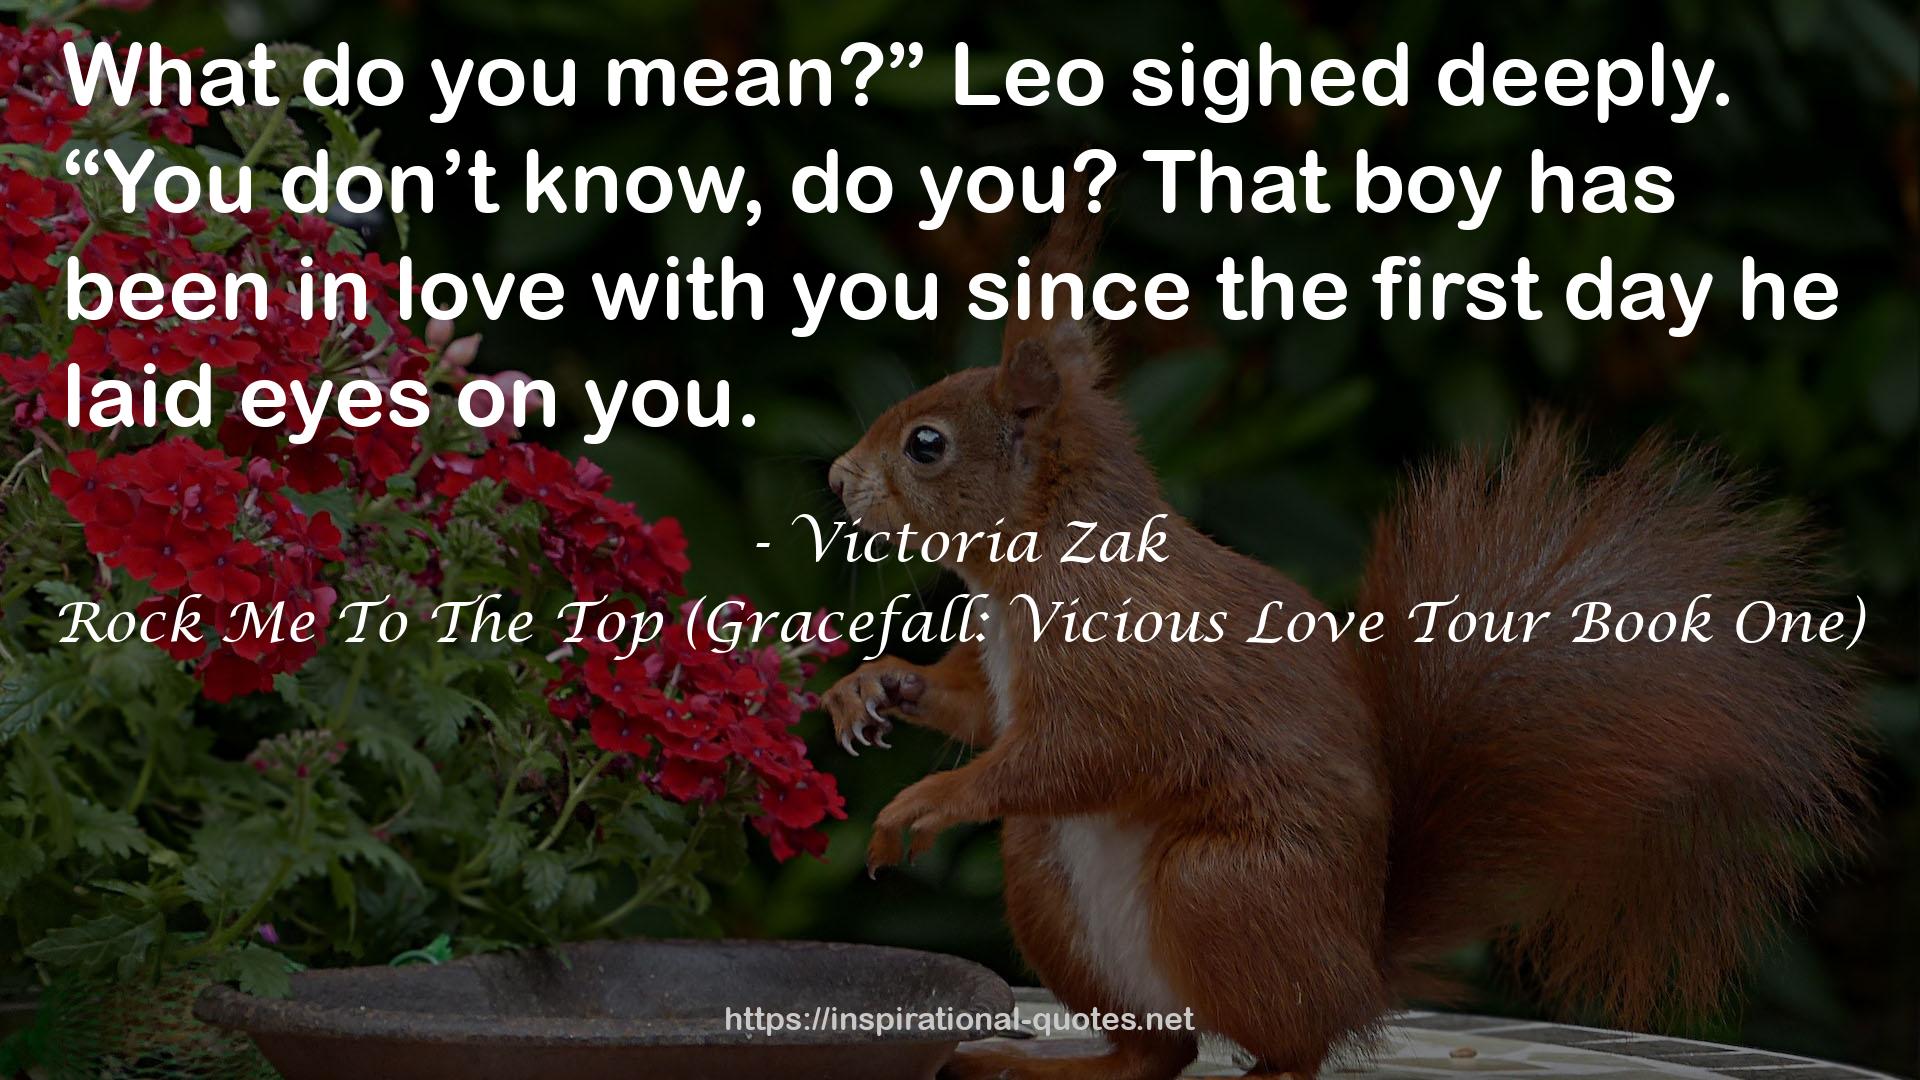 Rock Me To The Top (Gracefall: Vicious Love Tour Book One) QUOTES